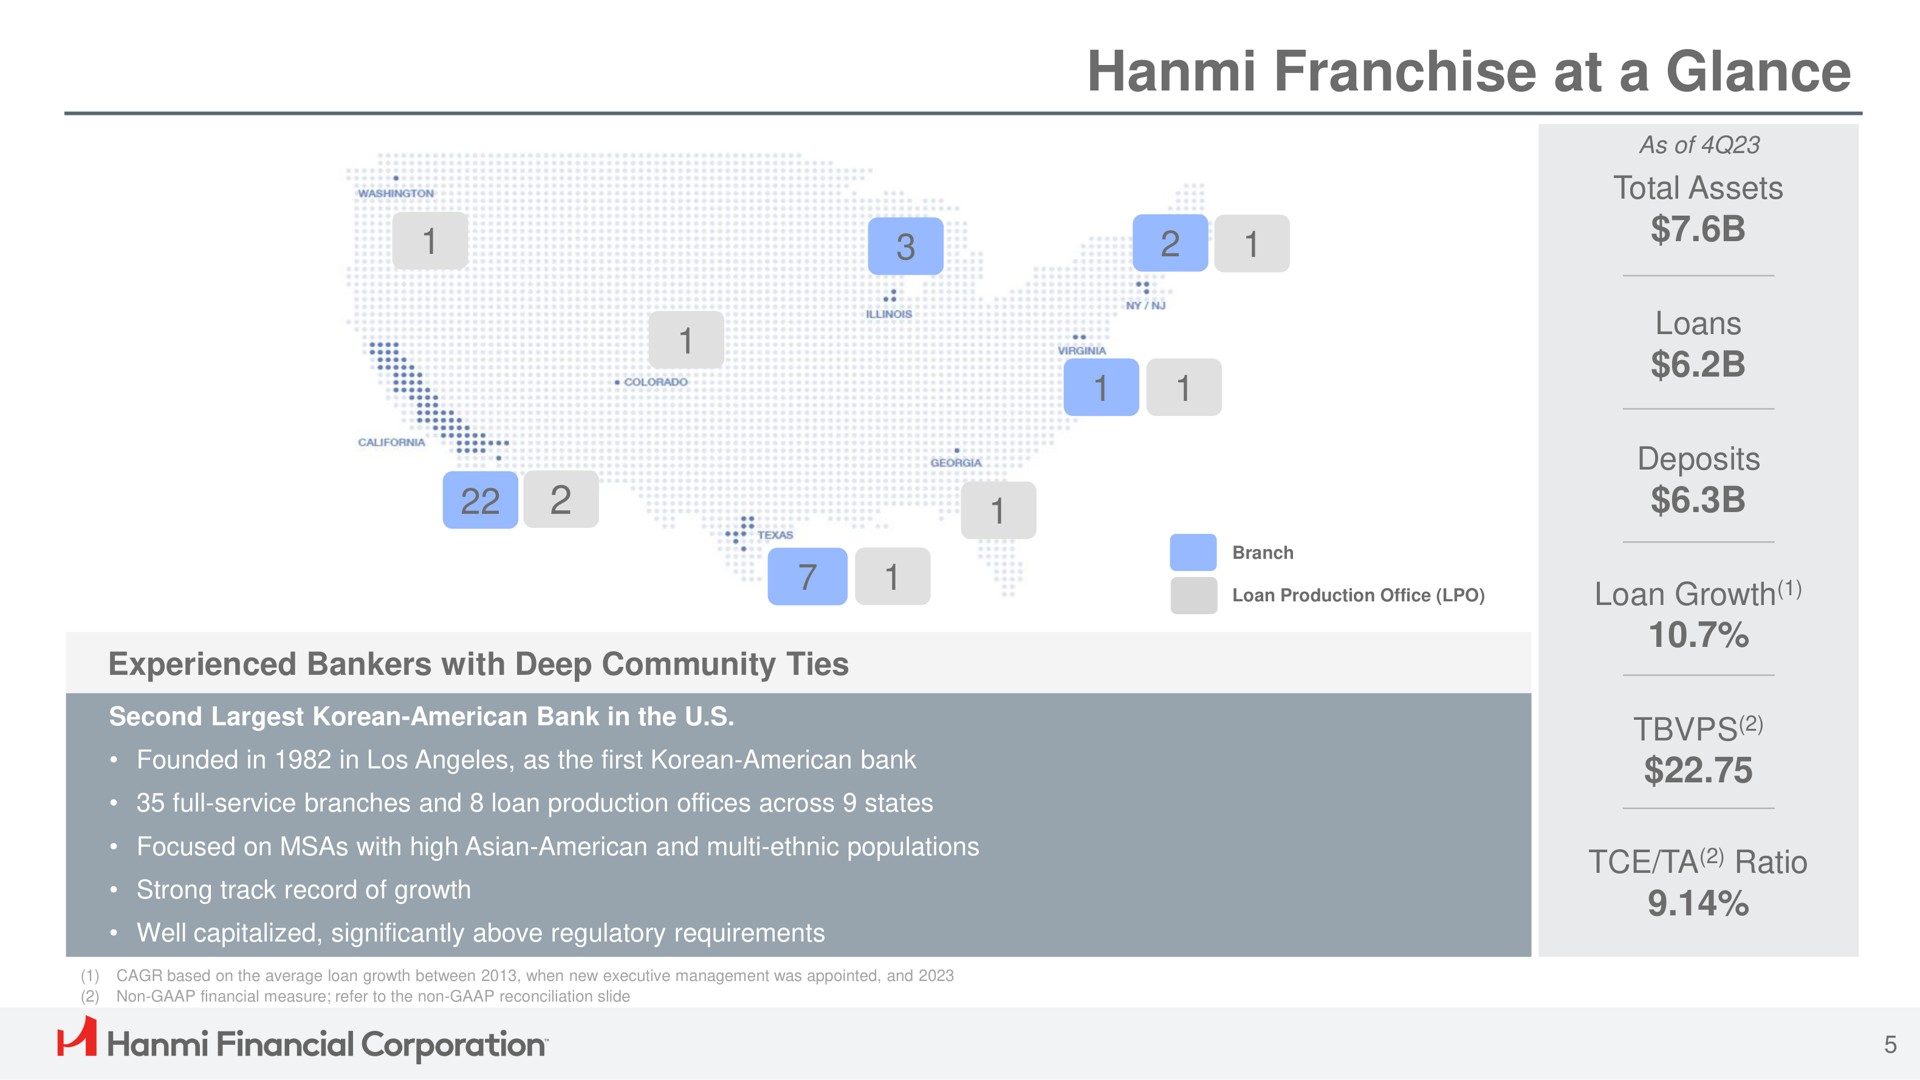 franchise at a glance he use financial corporation loans | Hanmi Financial